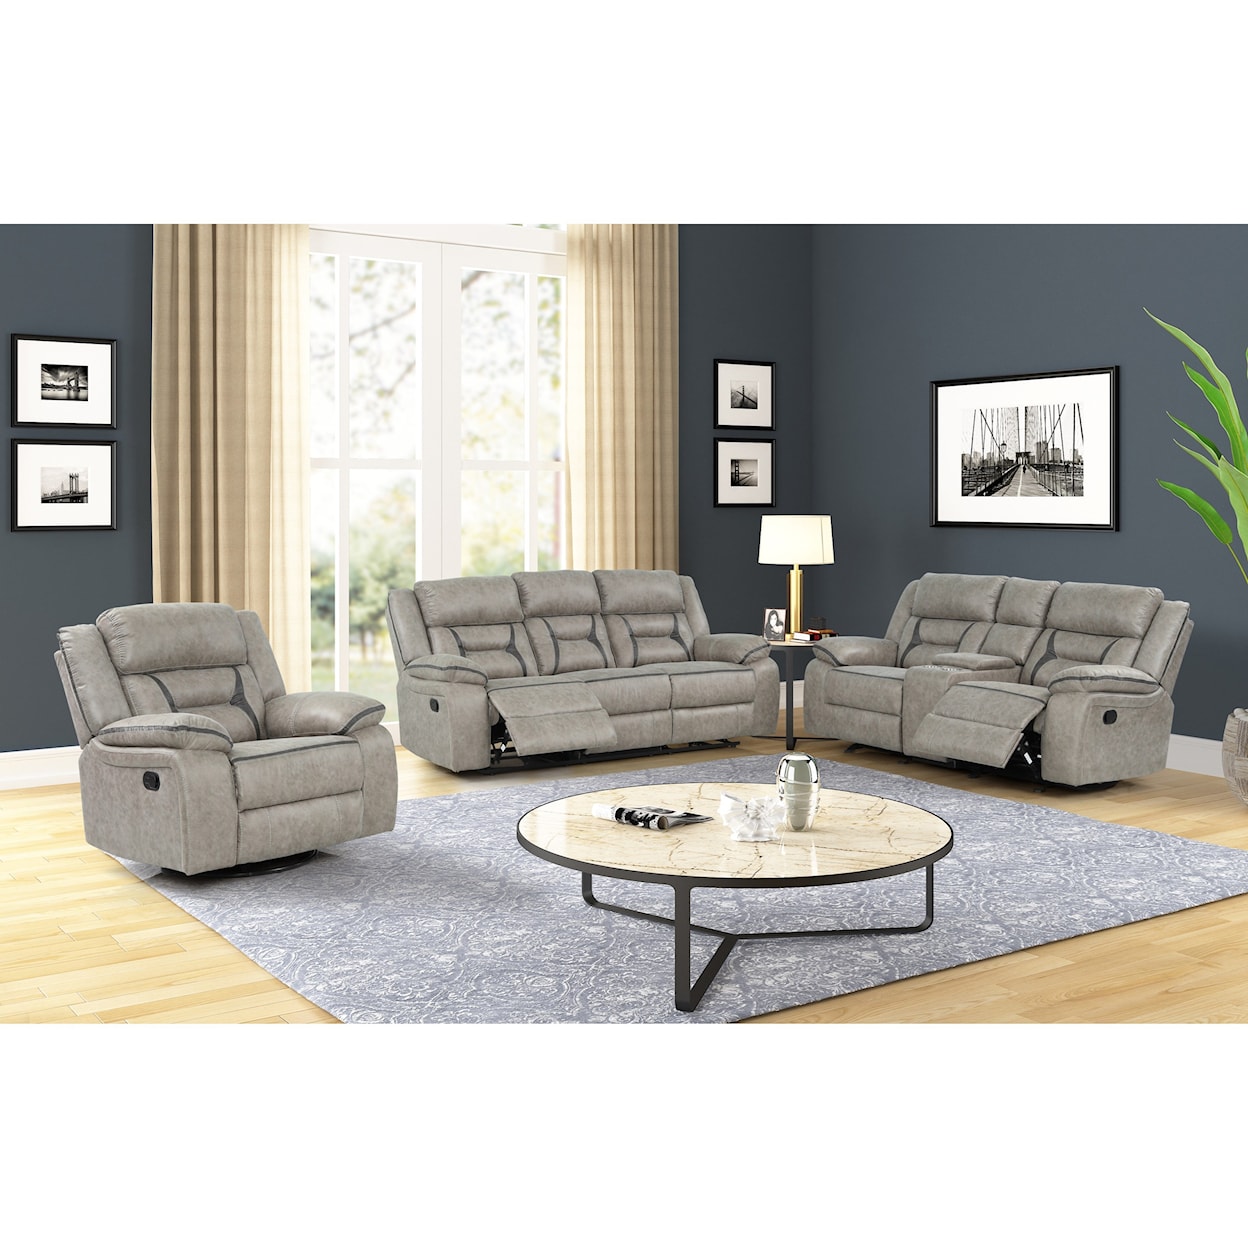 New Classic Roswell Glider Reclining Loveseat